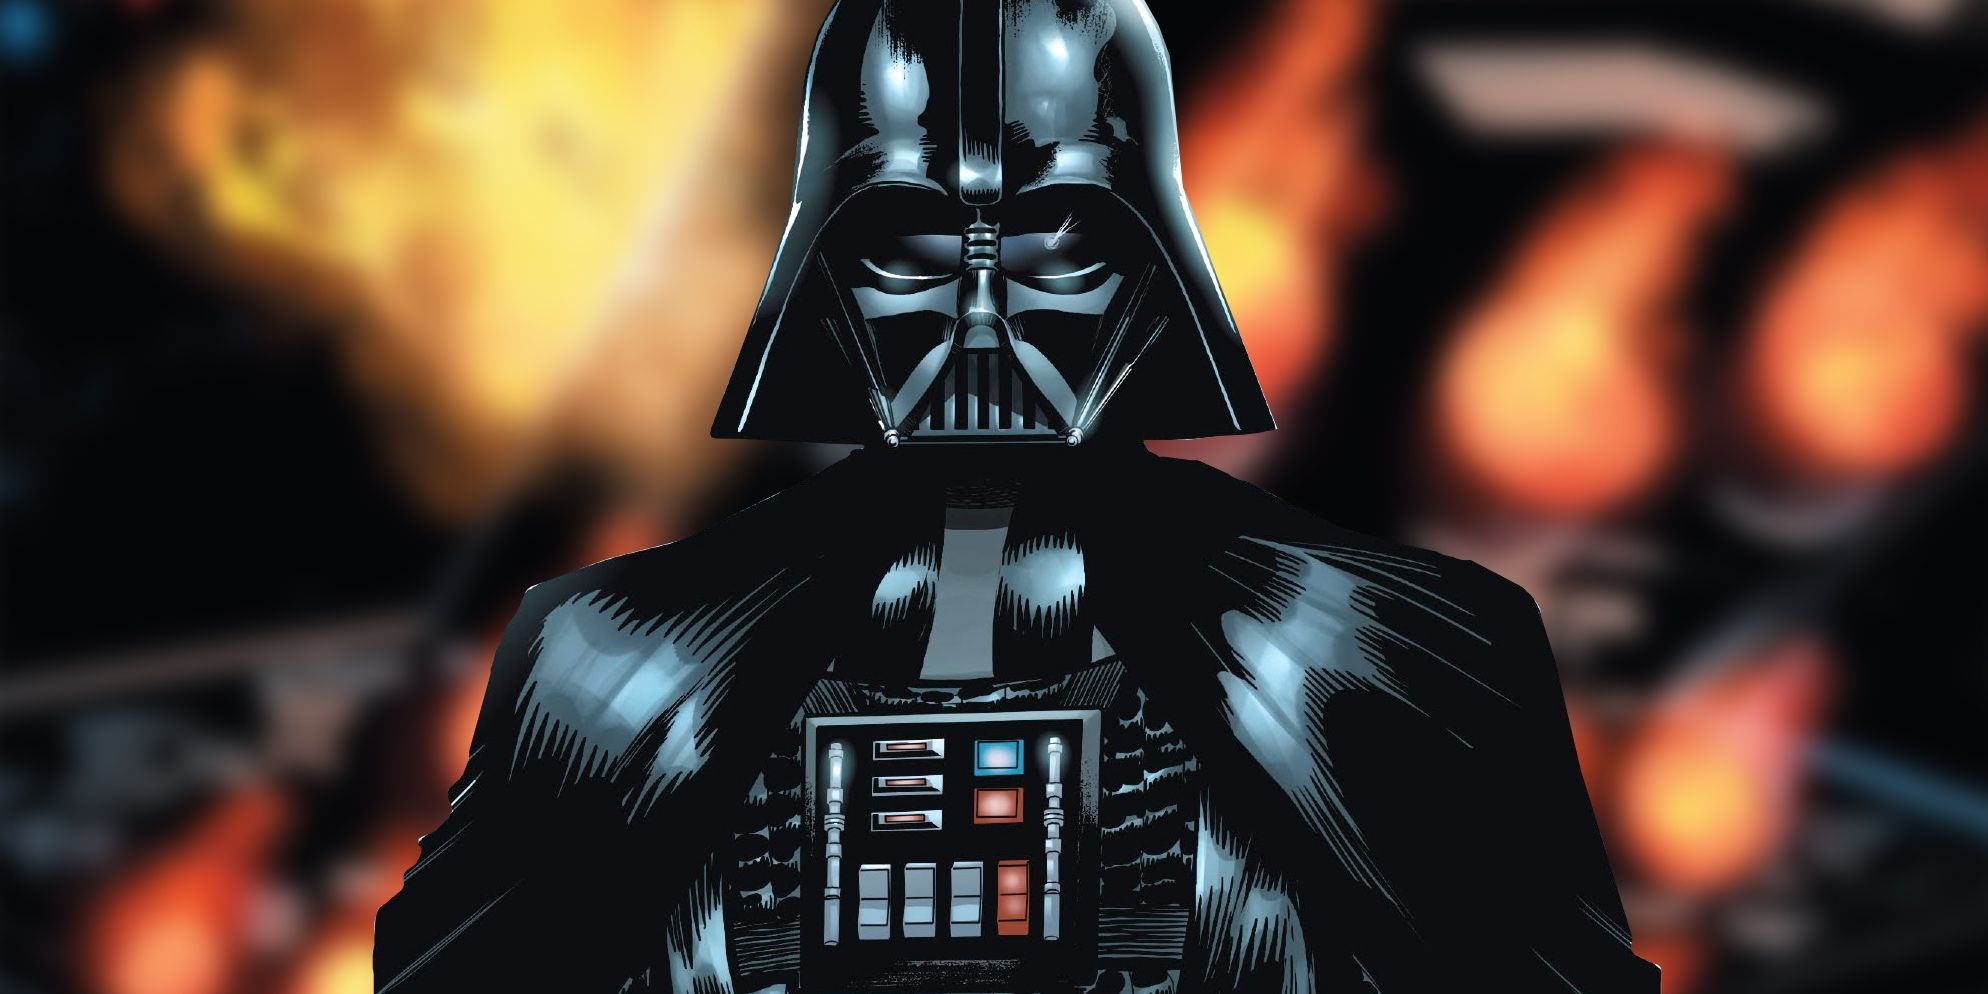 Darth Vader is Officially Able To Survive A Fall From Outer Space